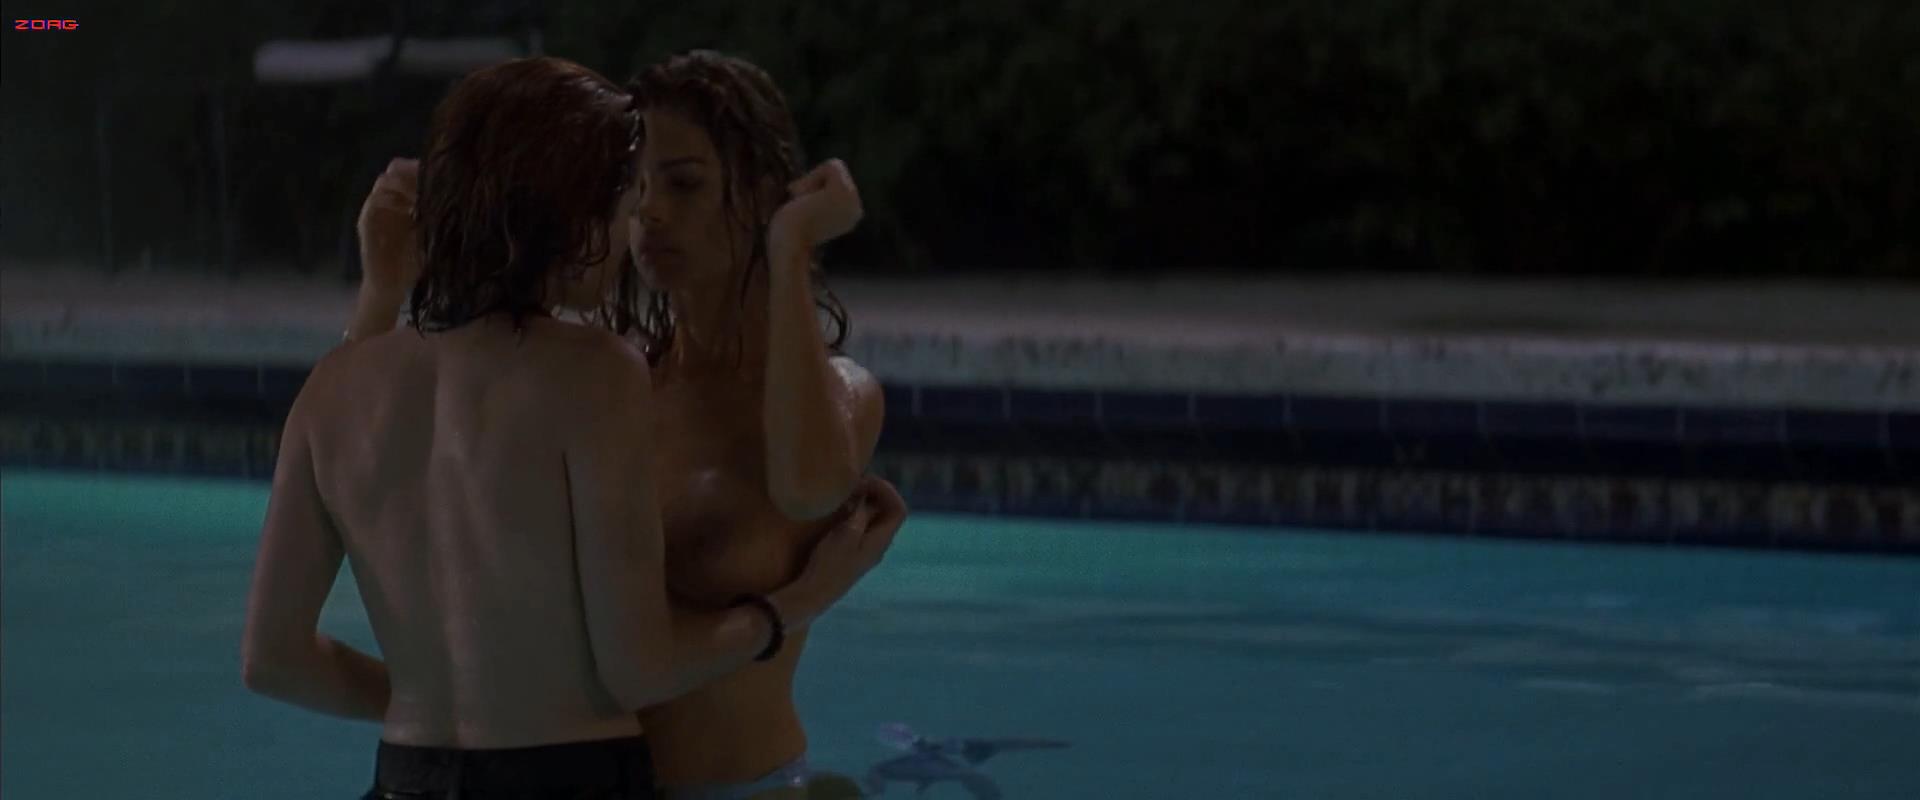 Twilight reccomend denise richards wild things composition